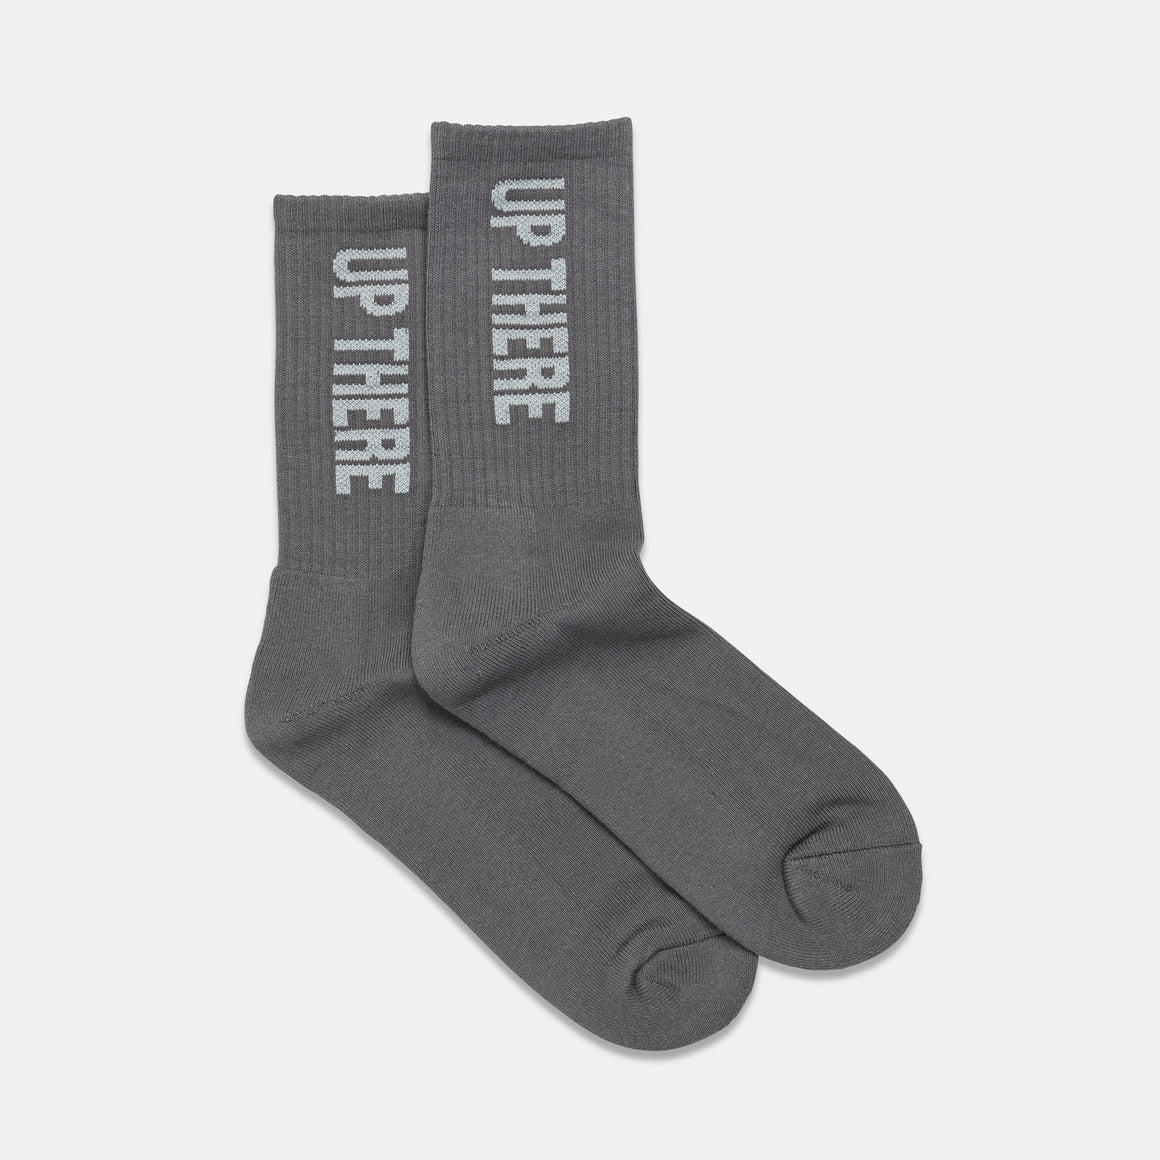 UP THERE - Reflective Logo Socks - Dark Grey - UP THERE